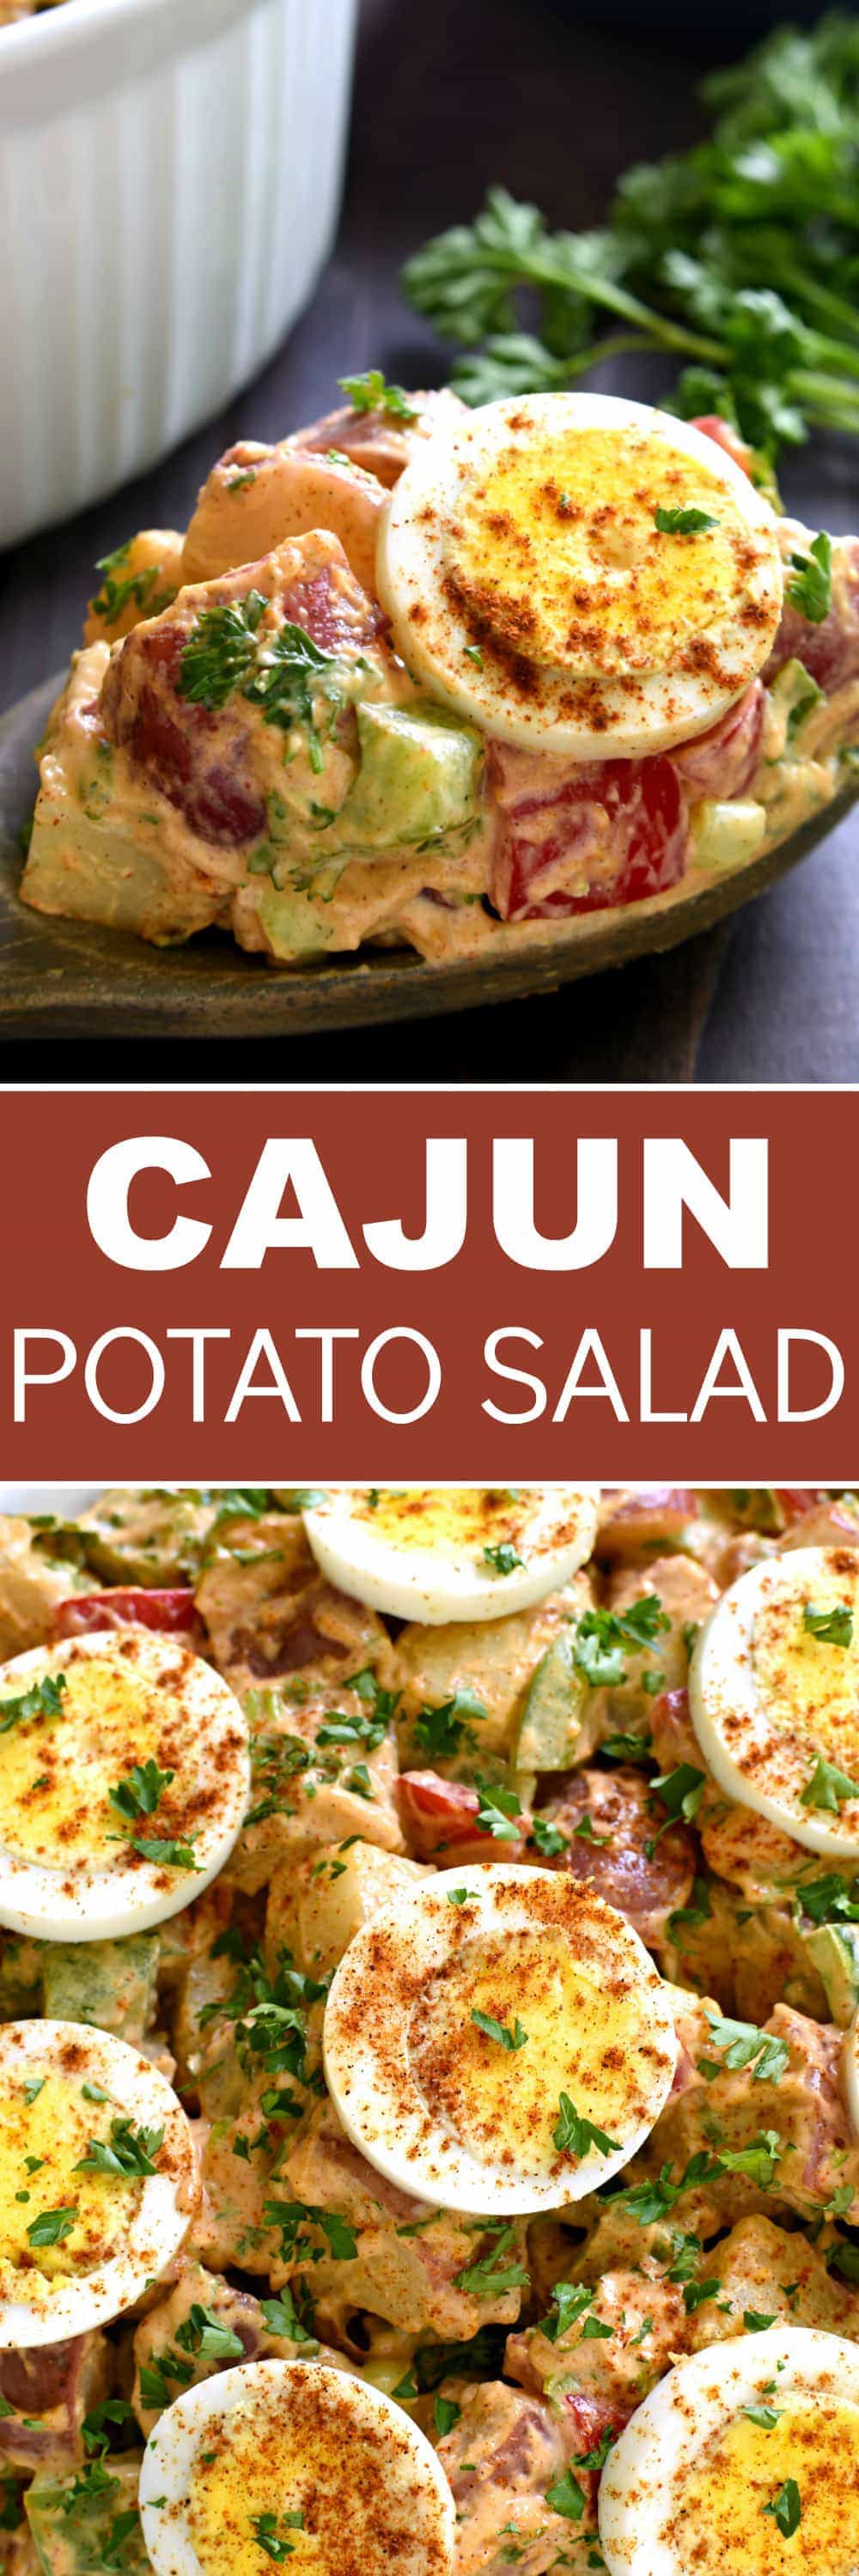 This Cajun Potato Salad is flavor-packed and delicious! The best twist on a classic summer salad....with a kick!